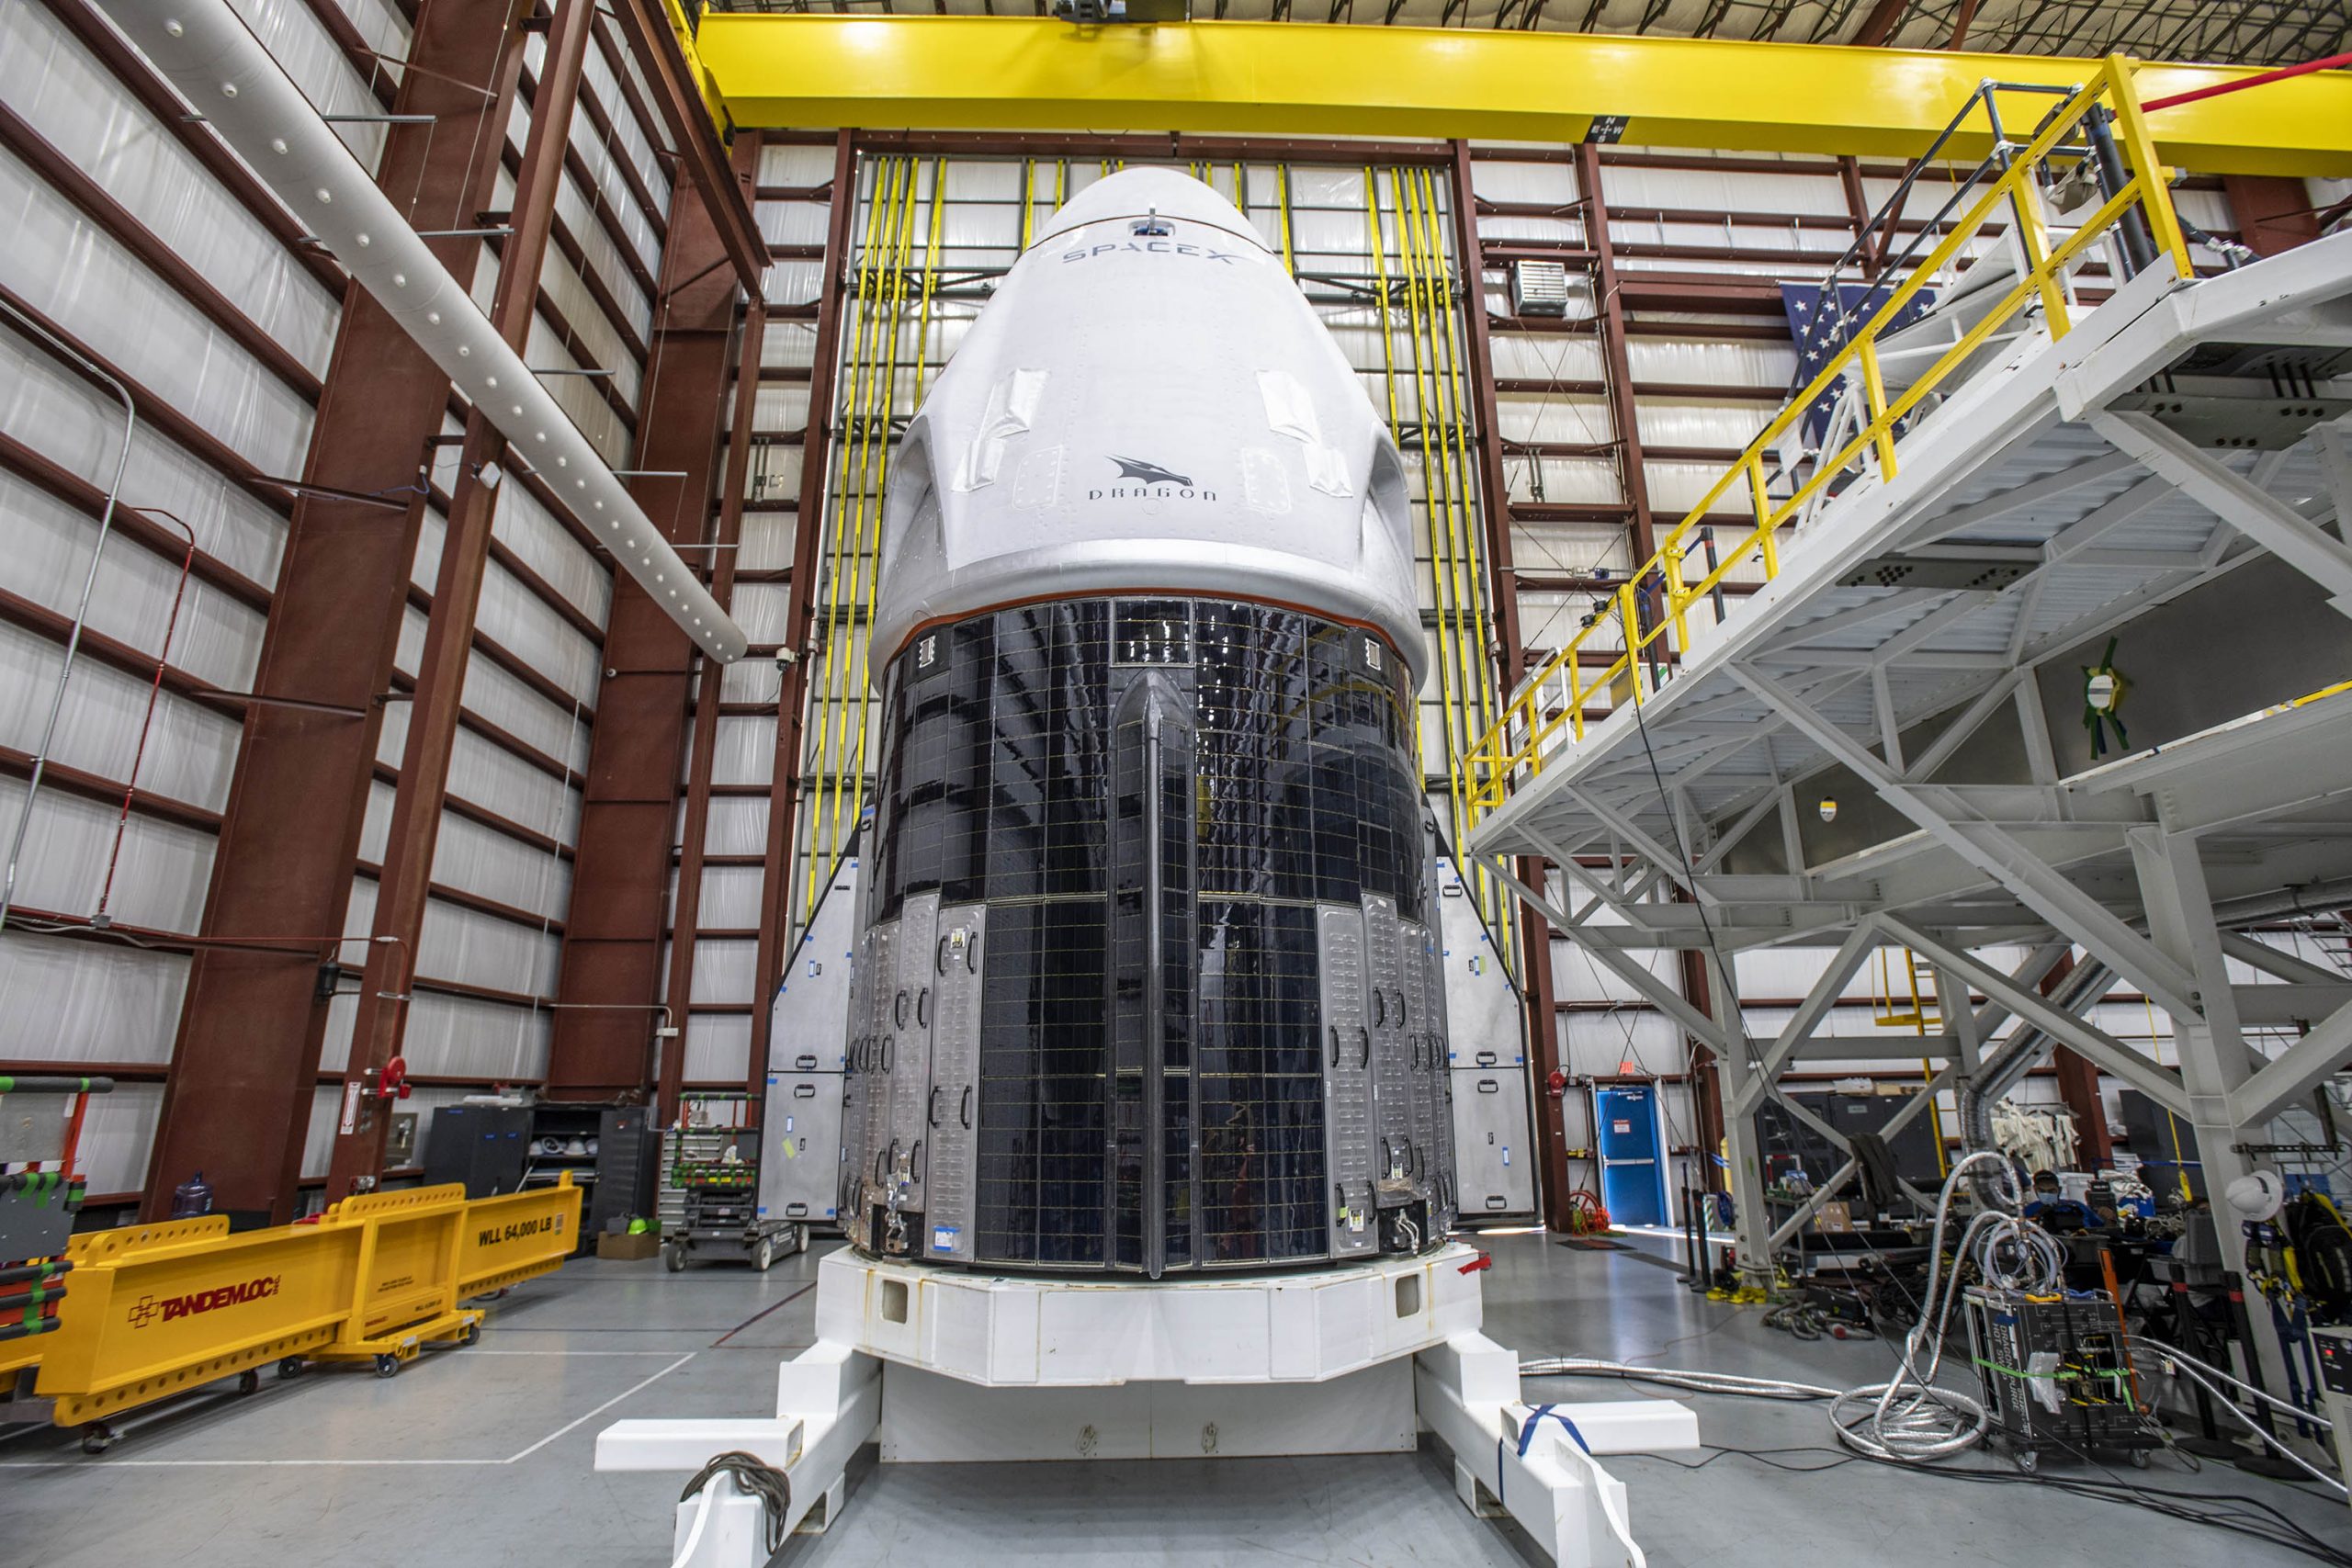 SpaceX's Crew-1 Crew Dragon vehicle will launch NASA's first operational commercial flight crew on November 14, 2020.